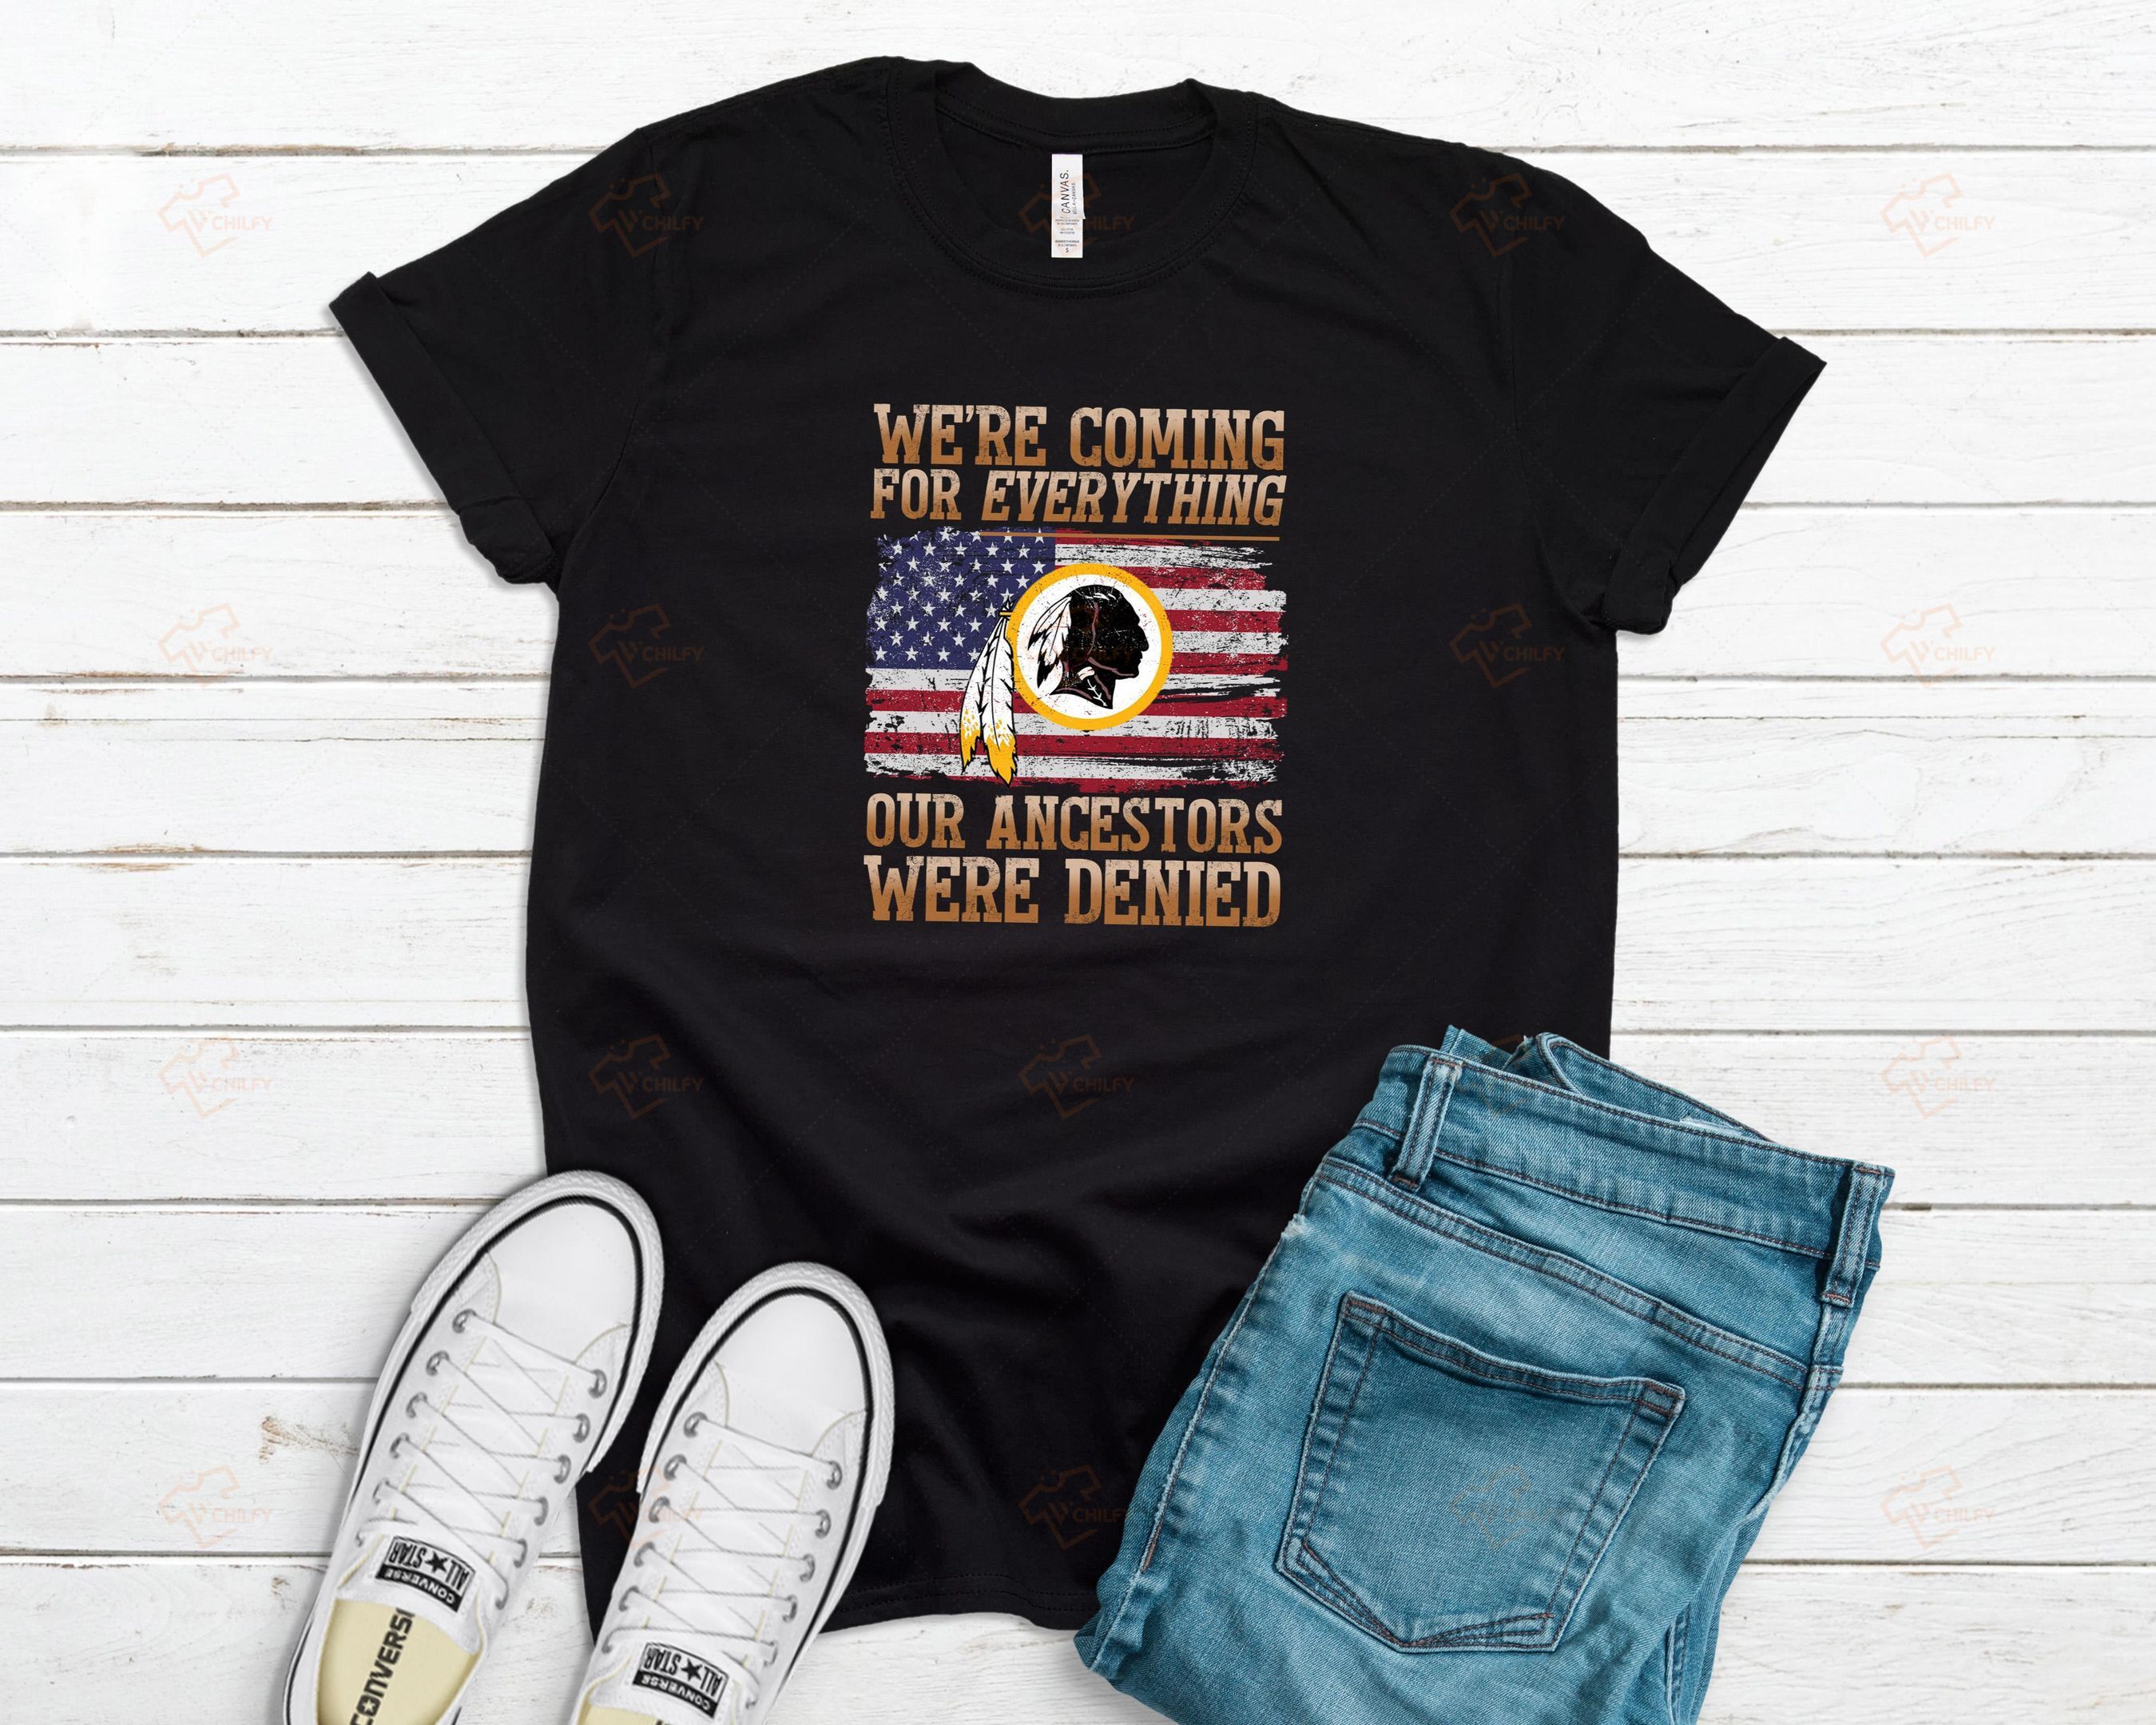 We are coming for everything shirt, Our ancestors were denied shirt, badass Native t shirt, Native American shirt, gift for Indigenous people